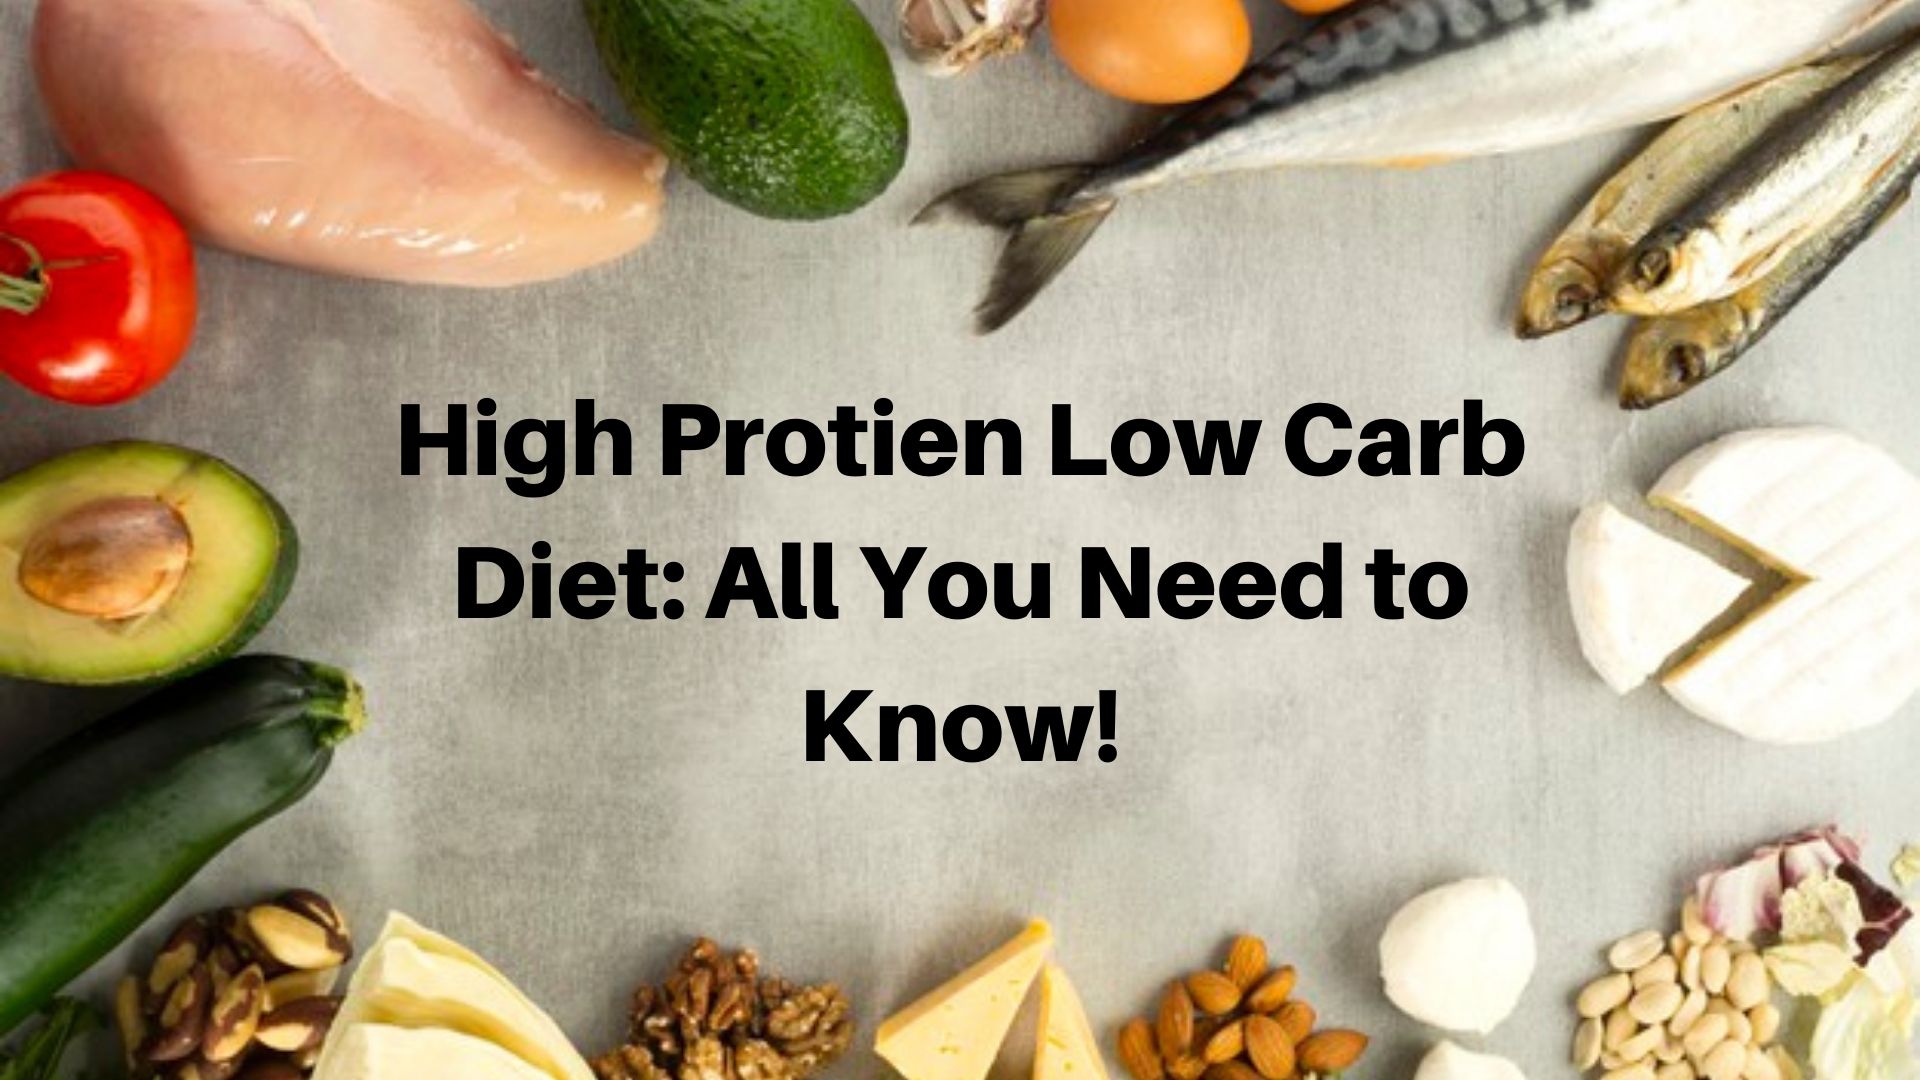 High Protien Low Carb Diet: All You Need to Know! - Keto Weightloss Now